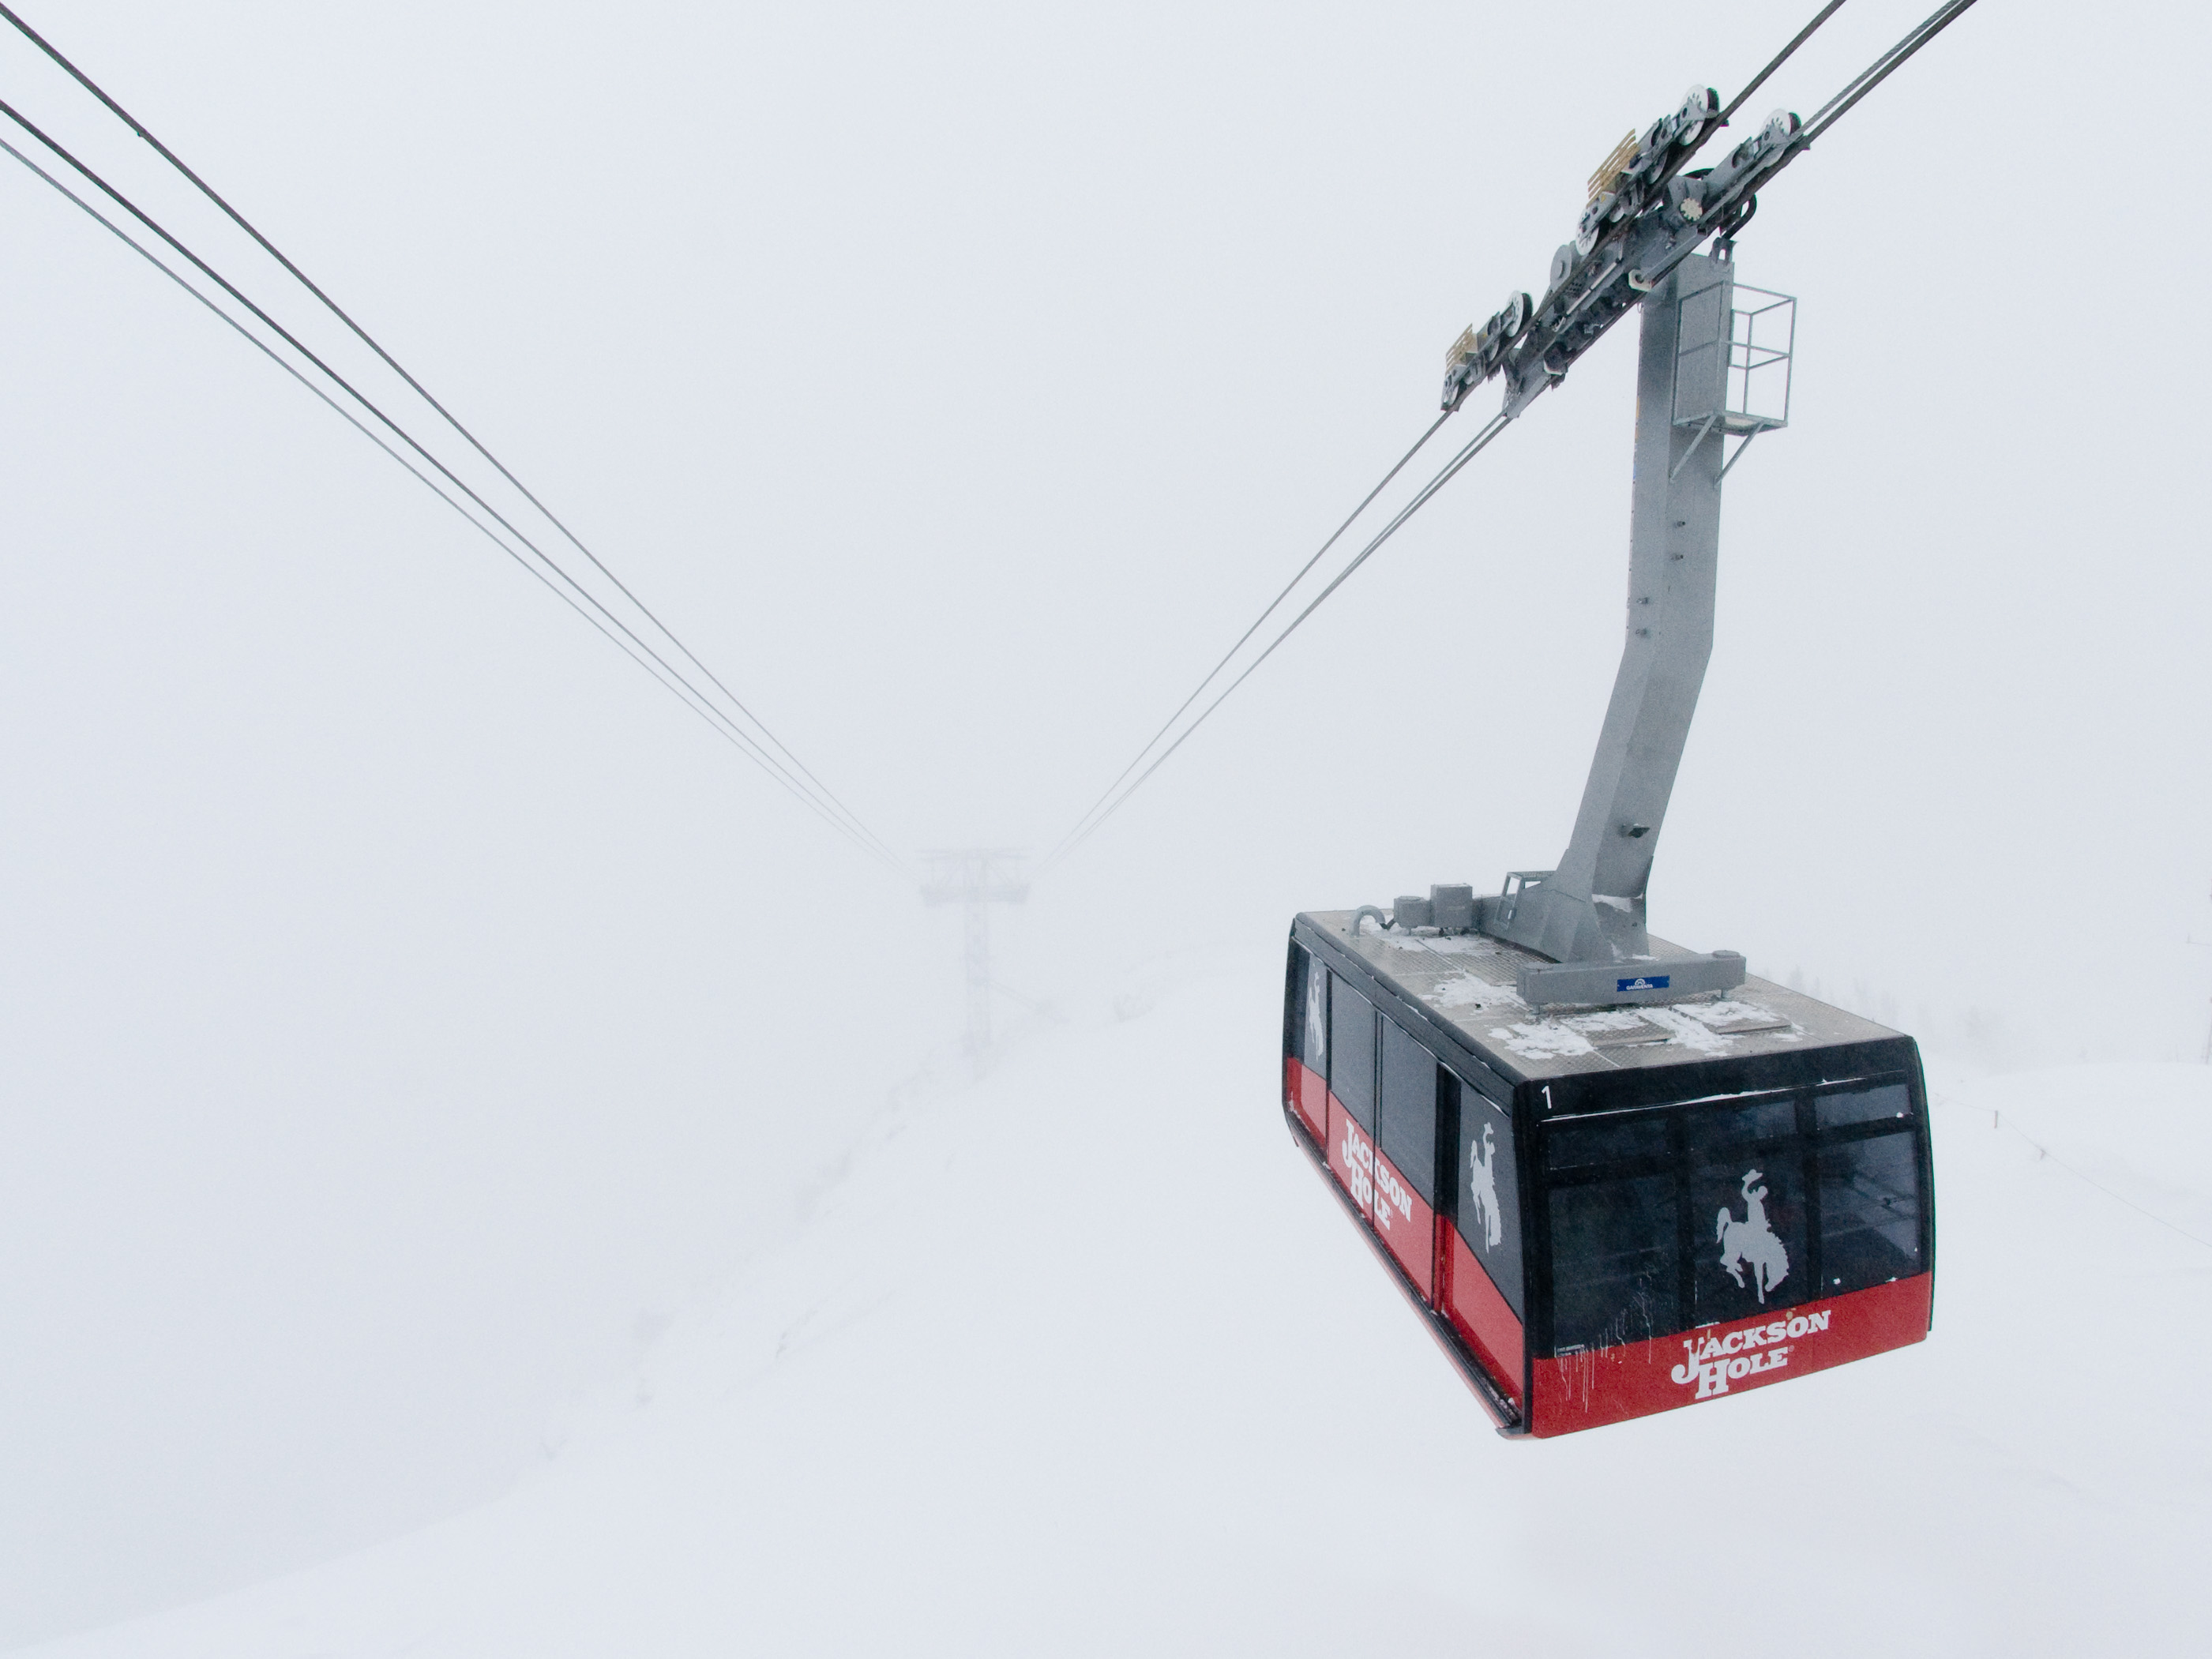 Photo Credit- Tristan Greszko/Jackson Hole Mountain Resort, part of the Mountain Collective. The Mountain Collective goes on Sale for the 2019-2020 Season.  Valle Nevado, Chile added as first South American partner.